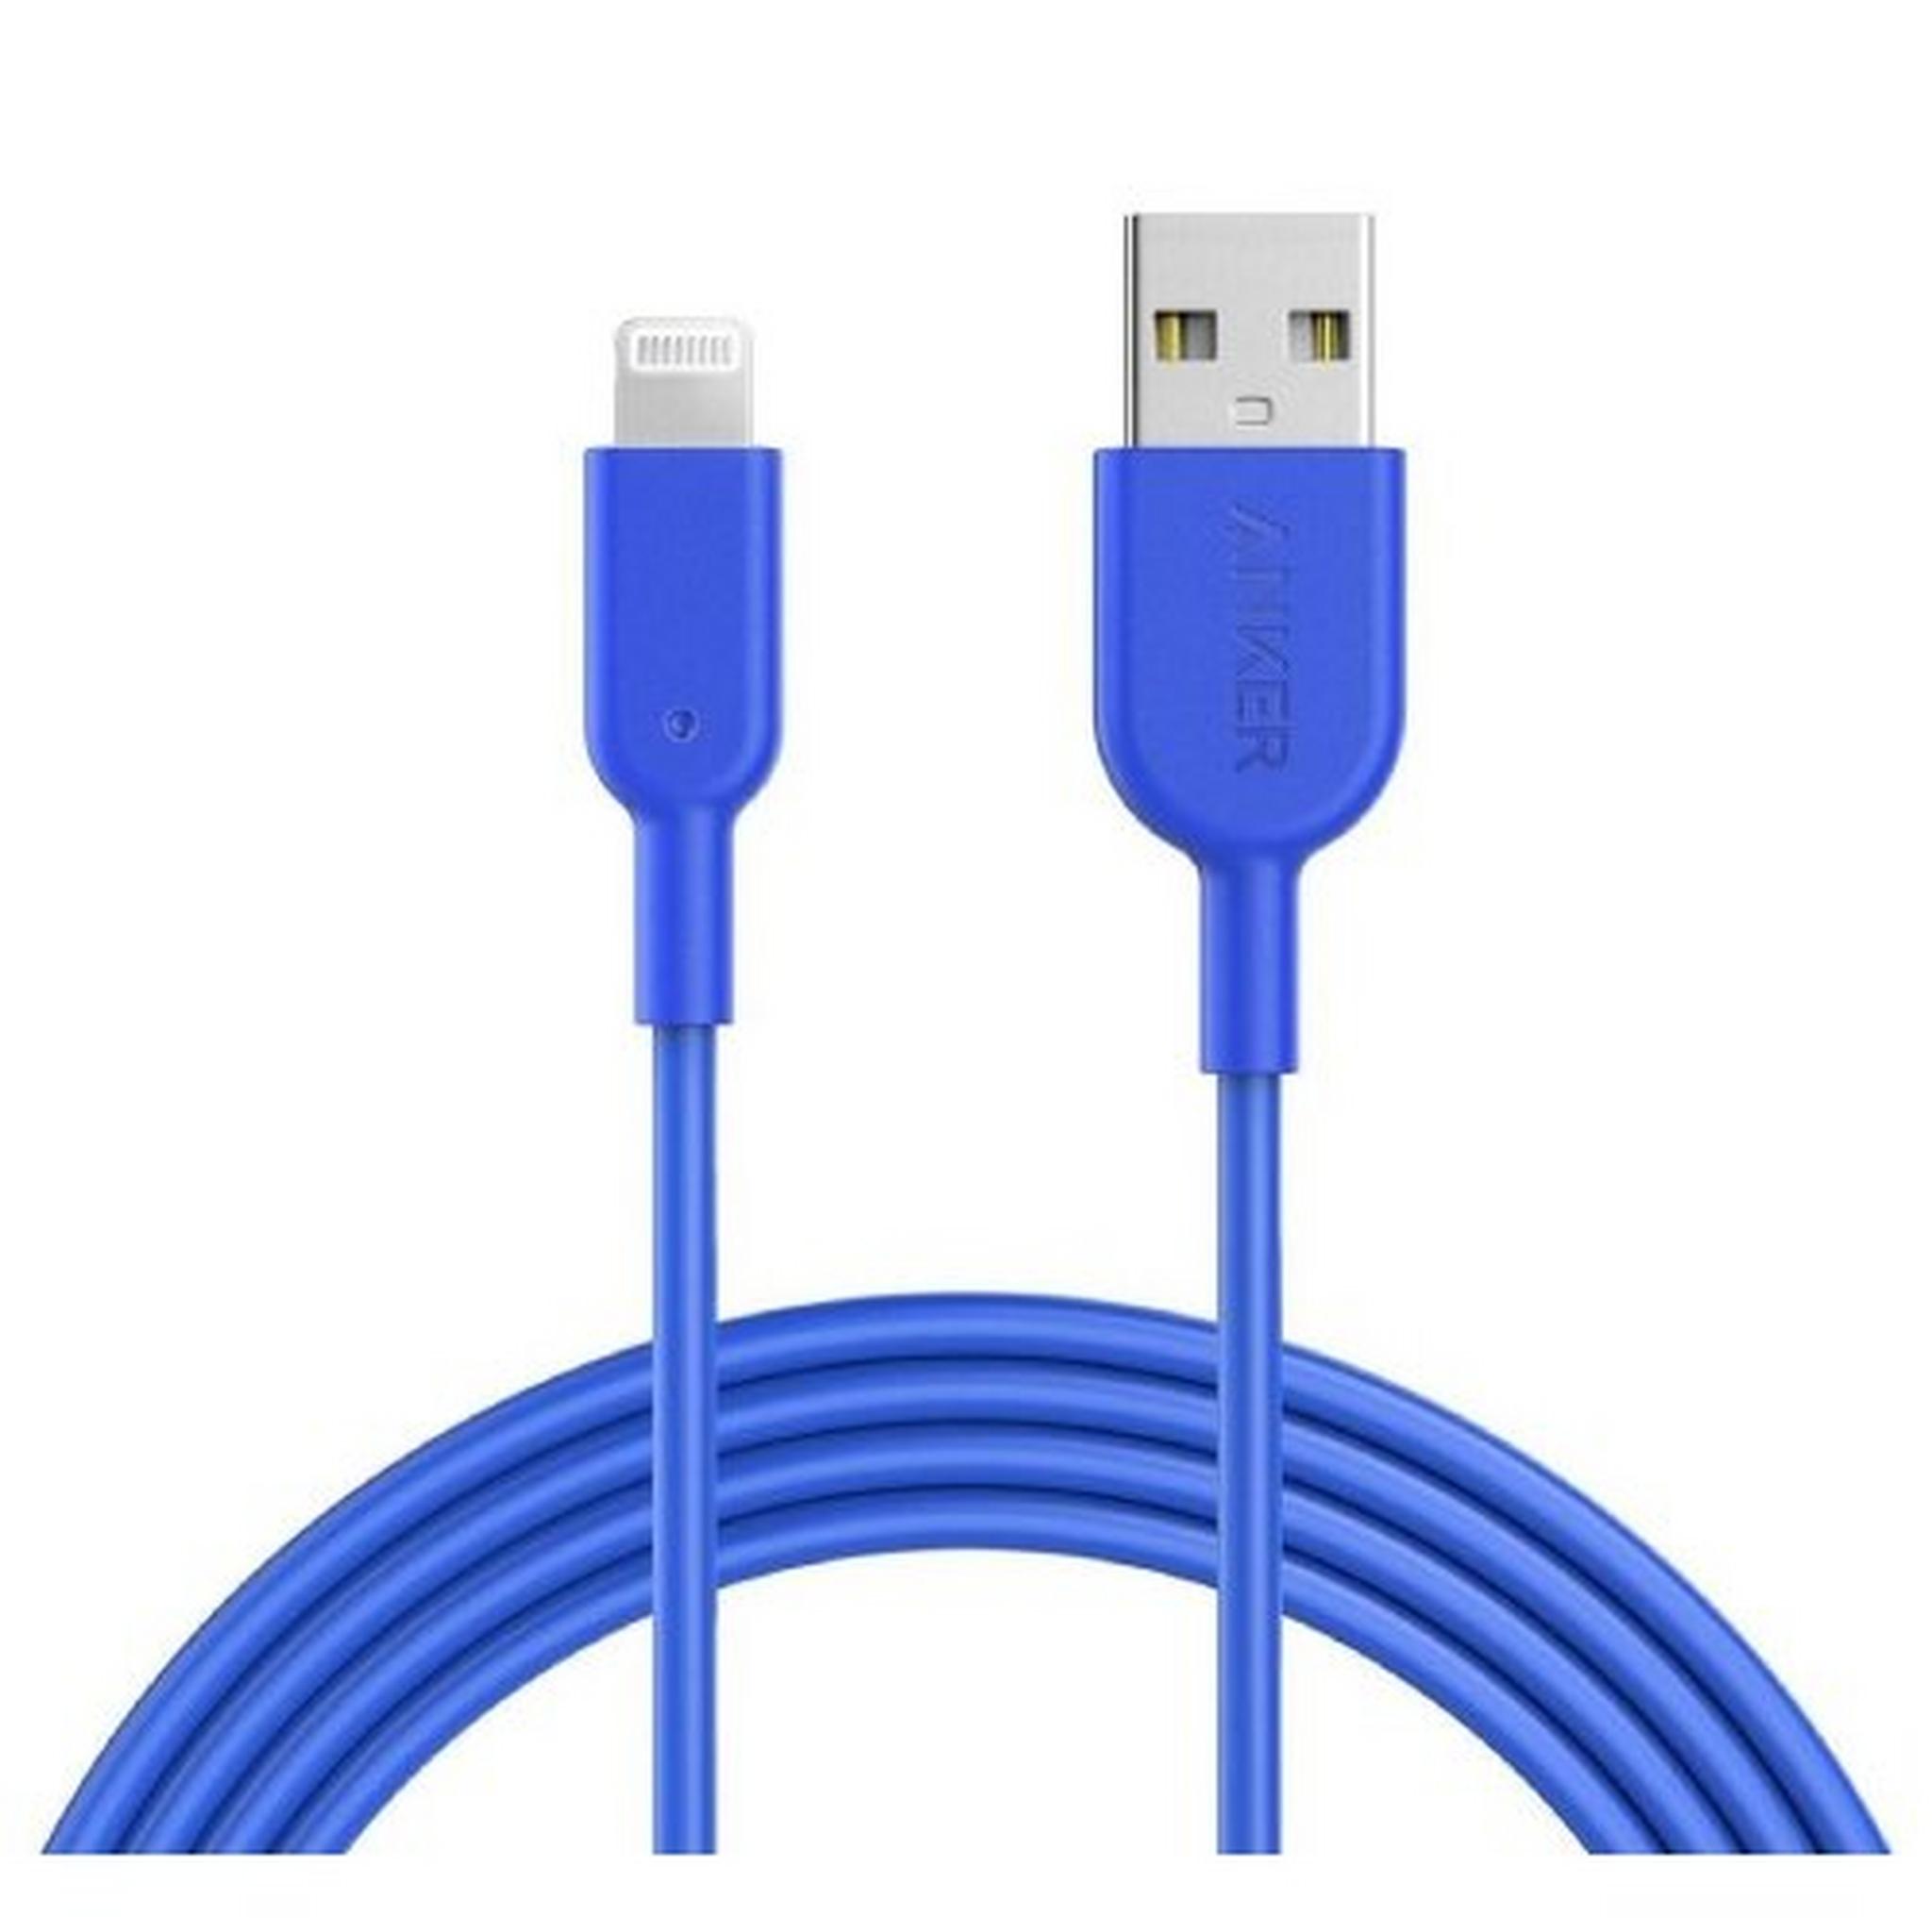 Anker PowerLine II C89 Lightning Cable 1.8M (A8433H32) - Blue